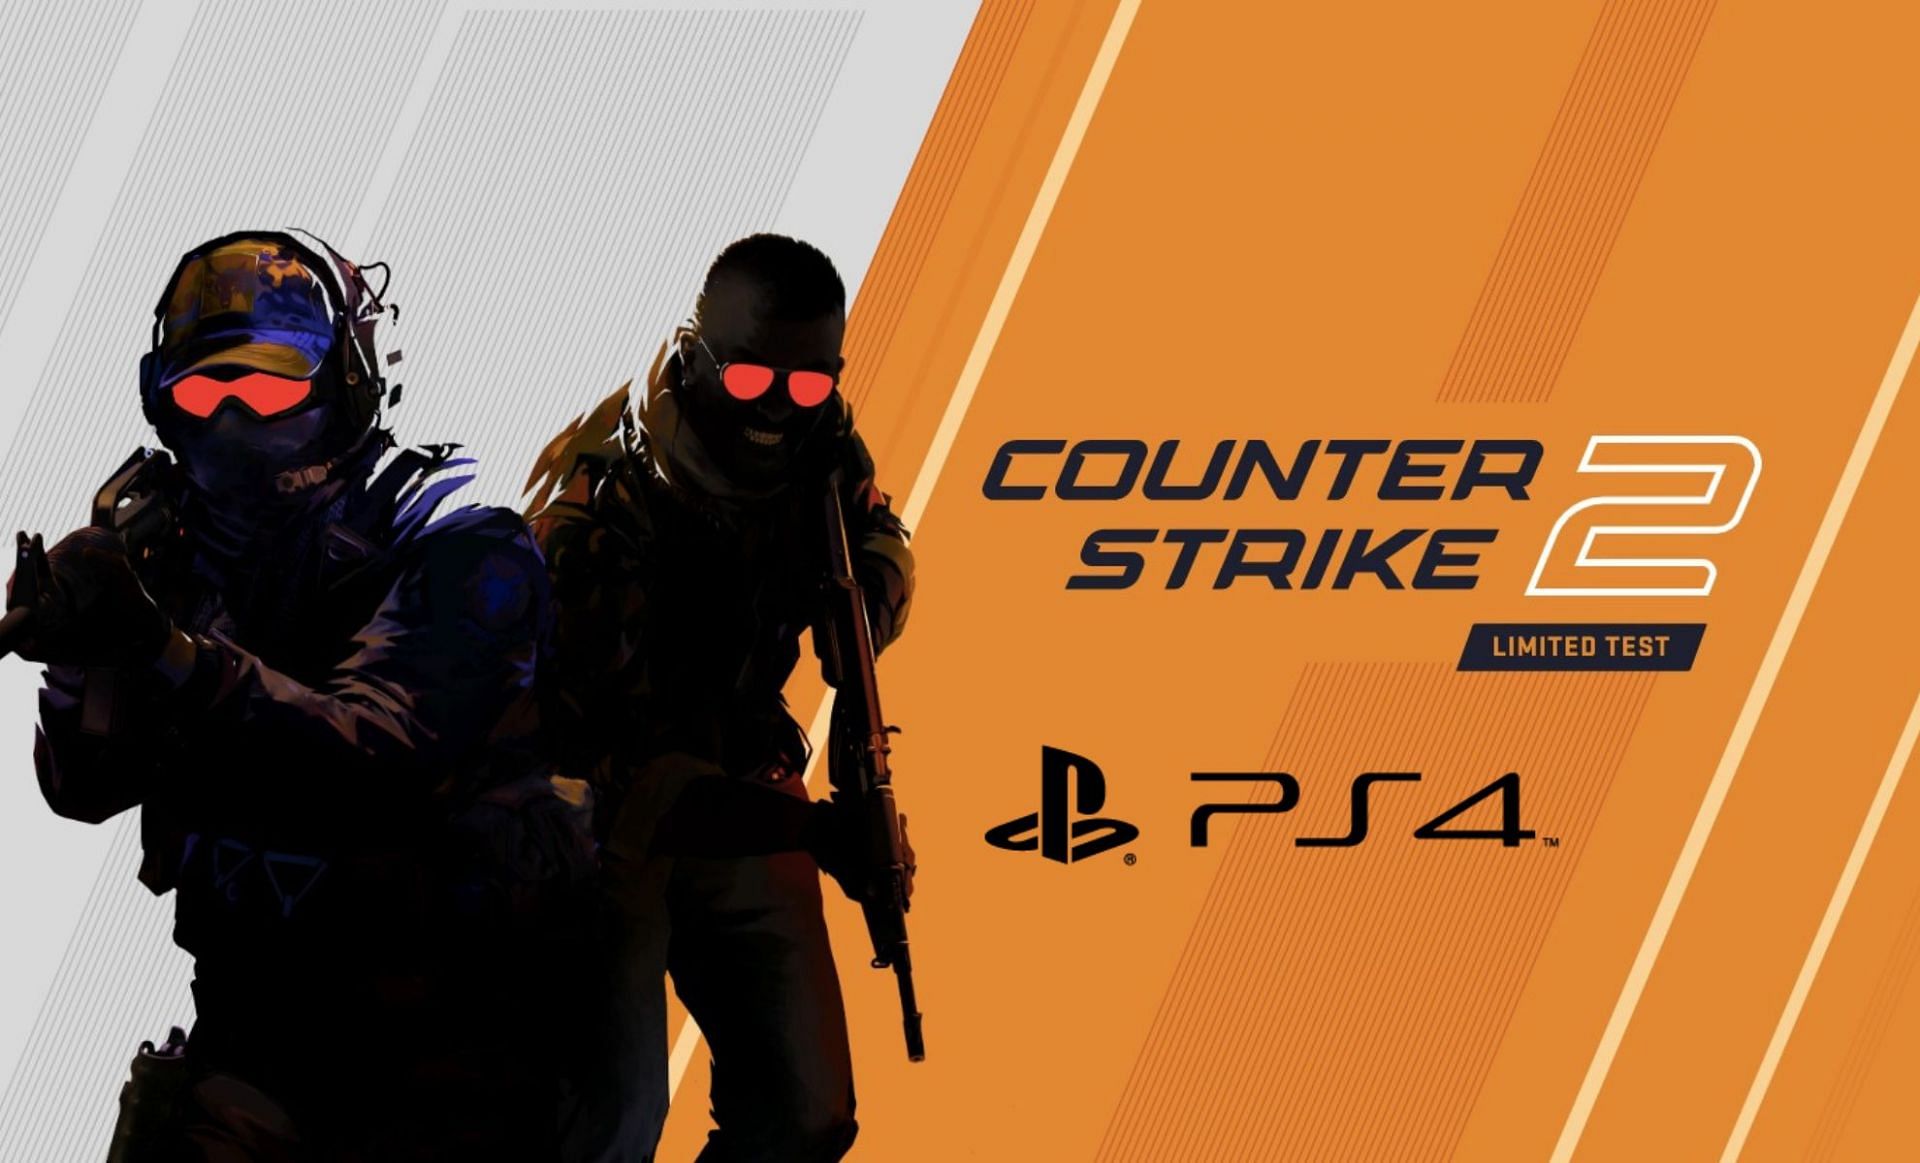 Will Counter Strike 2 be on PlayStation? (Image via Valve website)